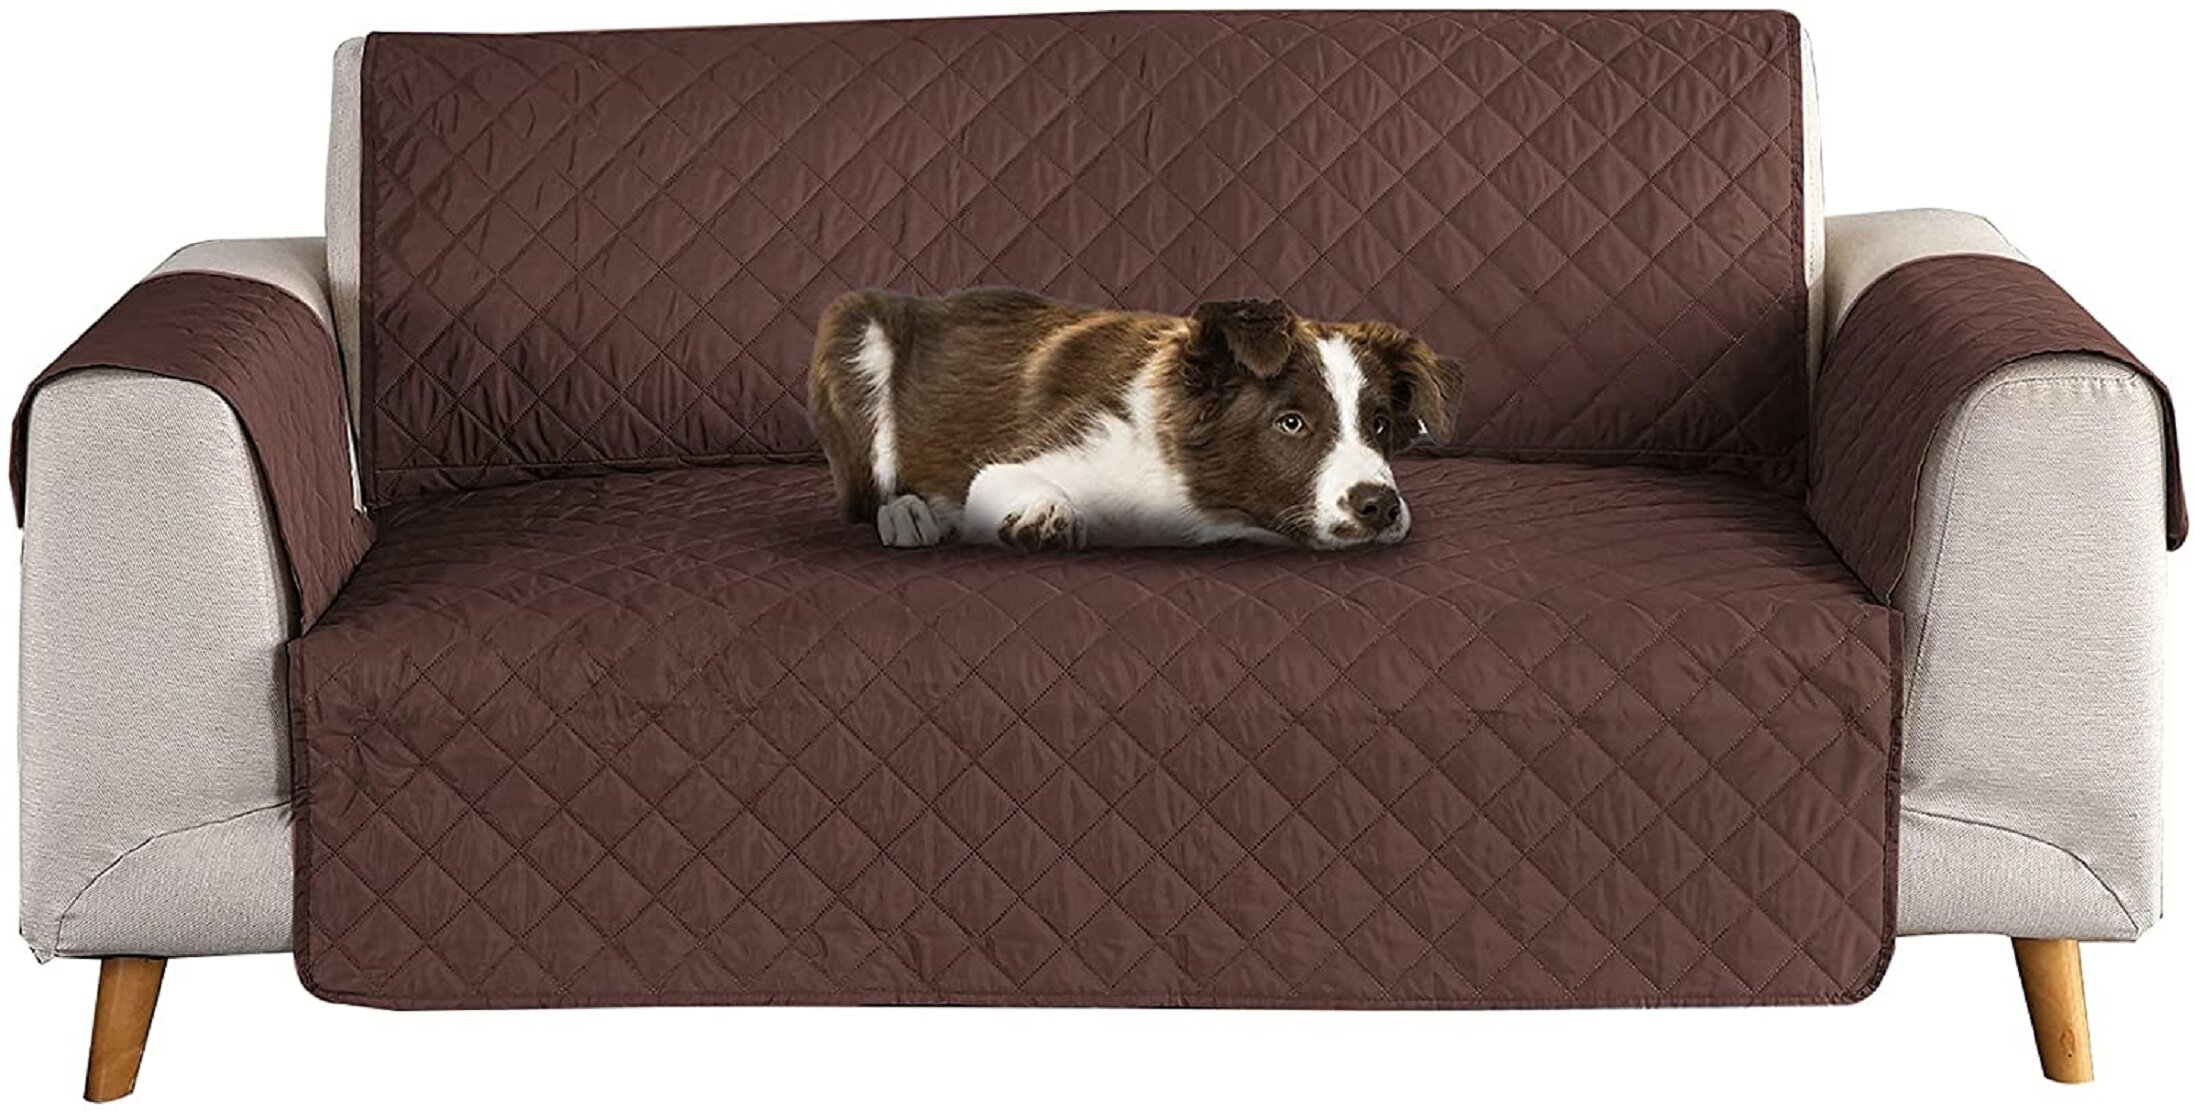 Ease Sofa Slipcover Reversible Couch Cover Water Resistant Sofa Cover Furniture Protective Cover with Elastic Band for Pet Children Kids Cat Dog Loveseat, Wine/Wine 